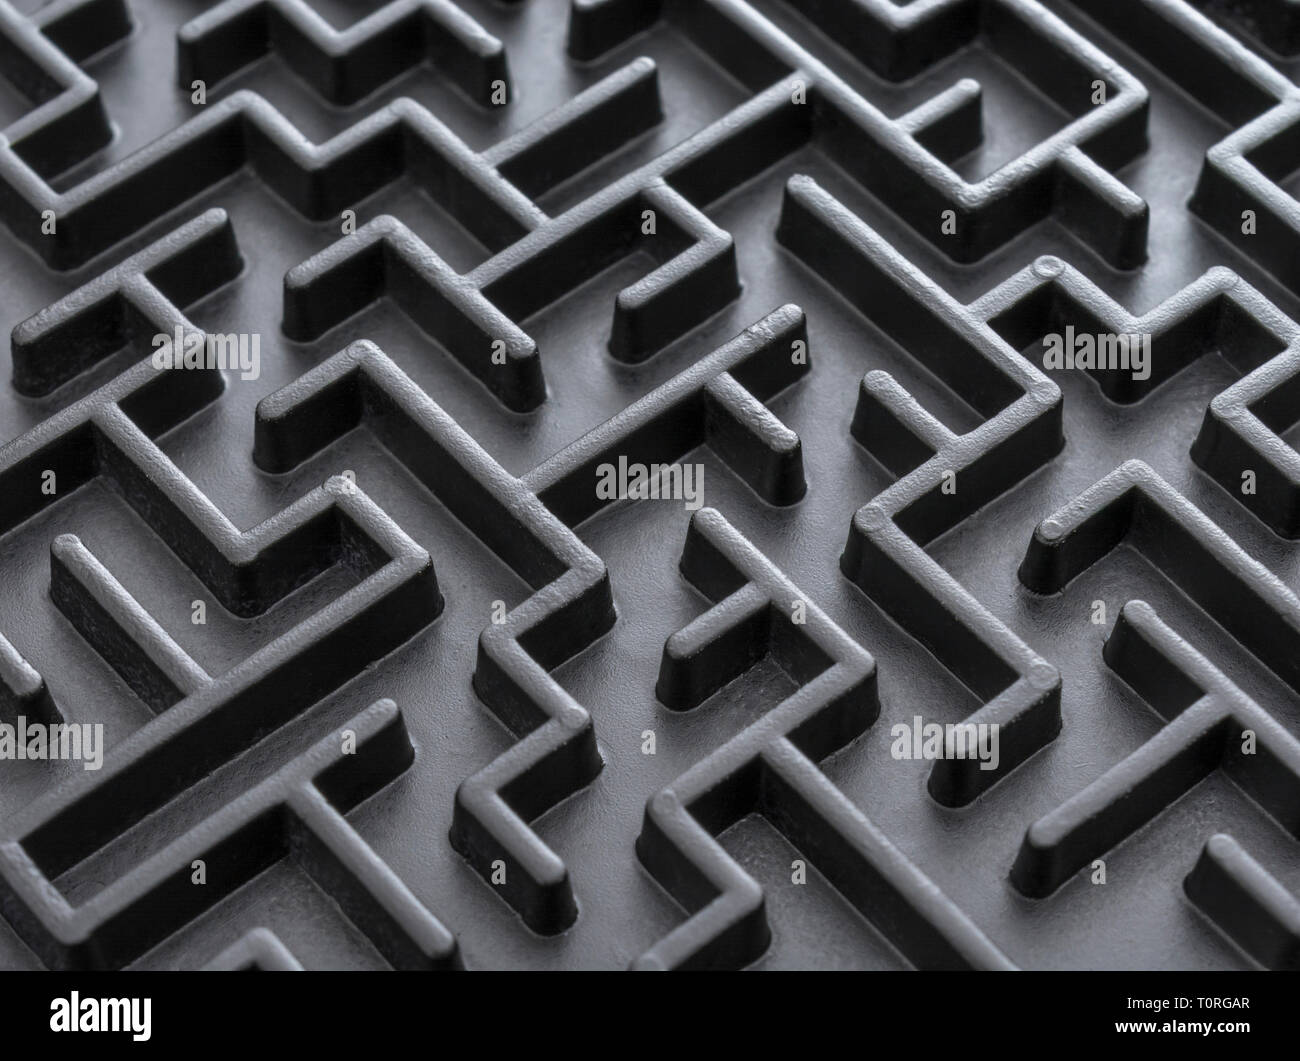 Macro shot of small toy maze painted black. For complex, getting lost, navigating, problem solving, unreachable goals, Brexit negotiations talks. Stock Photo